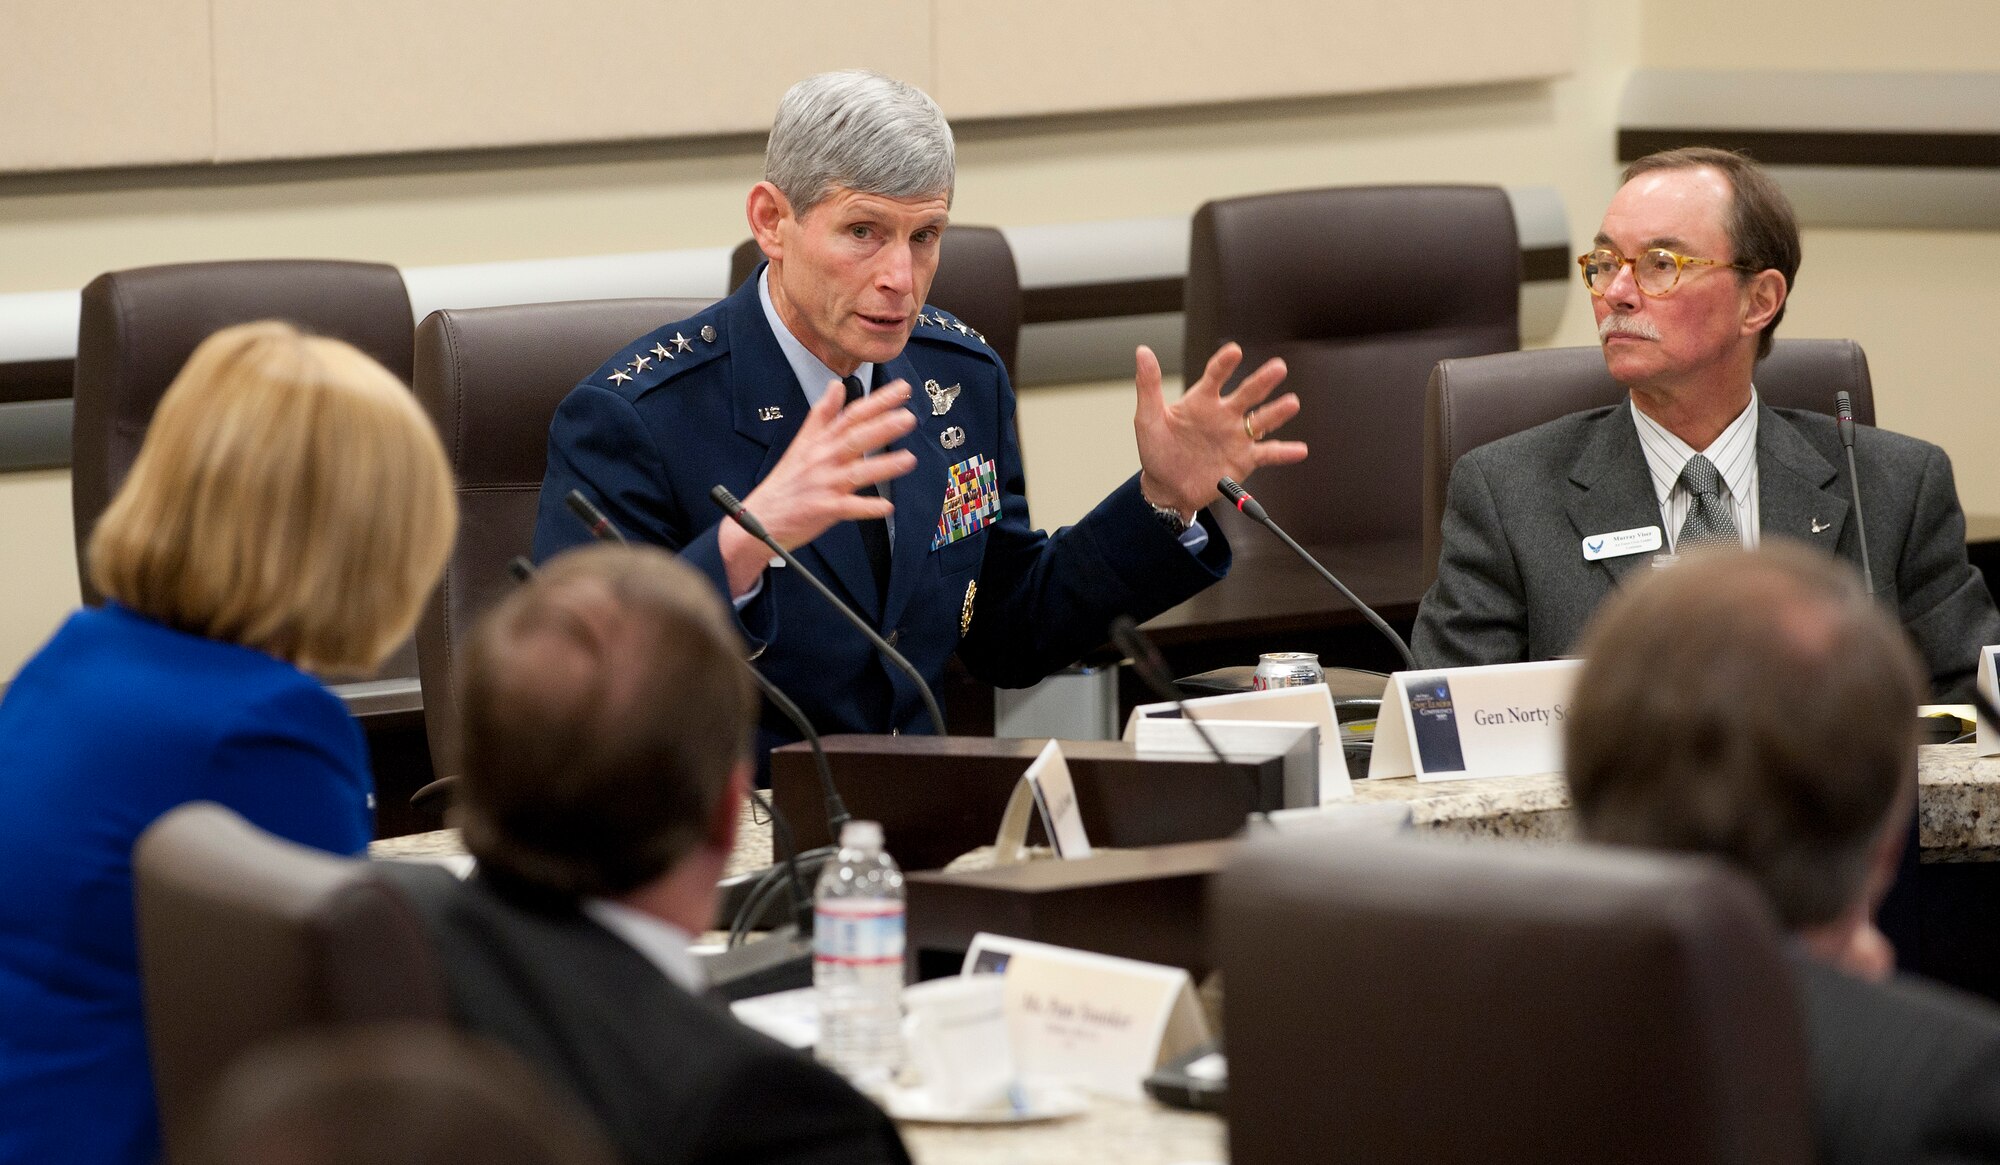 Air Force Chief of Staff Gen. Norton Schwartz (second from upper left) speaks with civic leaders representing communities from across the U.S. during a conference Jan. 31, 2012, at Joint Base Andrews, Md. The group of civic leaders will also visit Joint Base Eustis-Langley in Norfolk, Va., for a look at Air Combat Command. (U.S. Air Force photo/Jim Varhegyi)